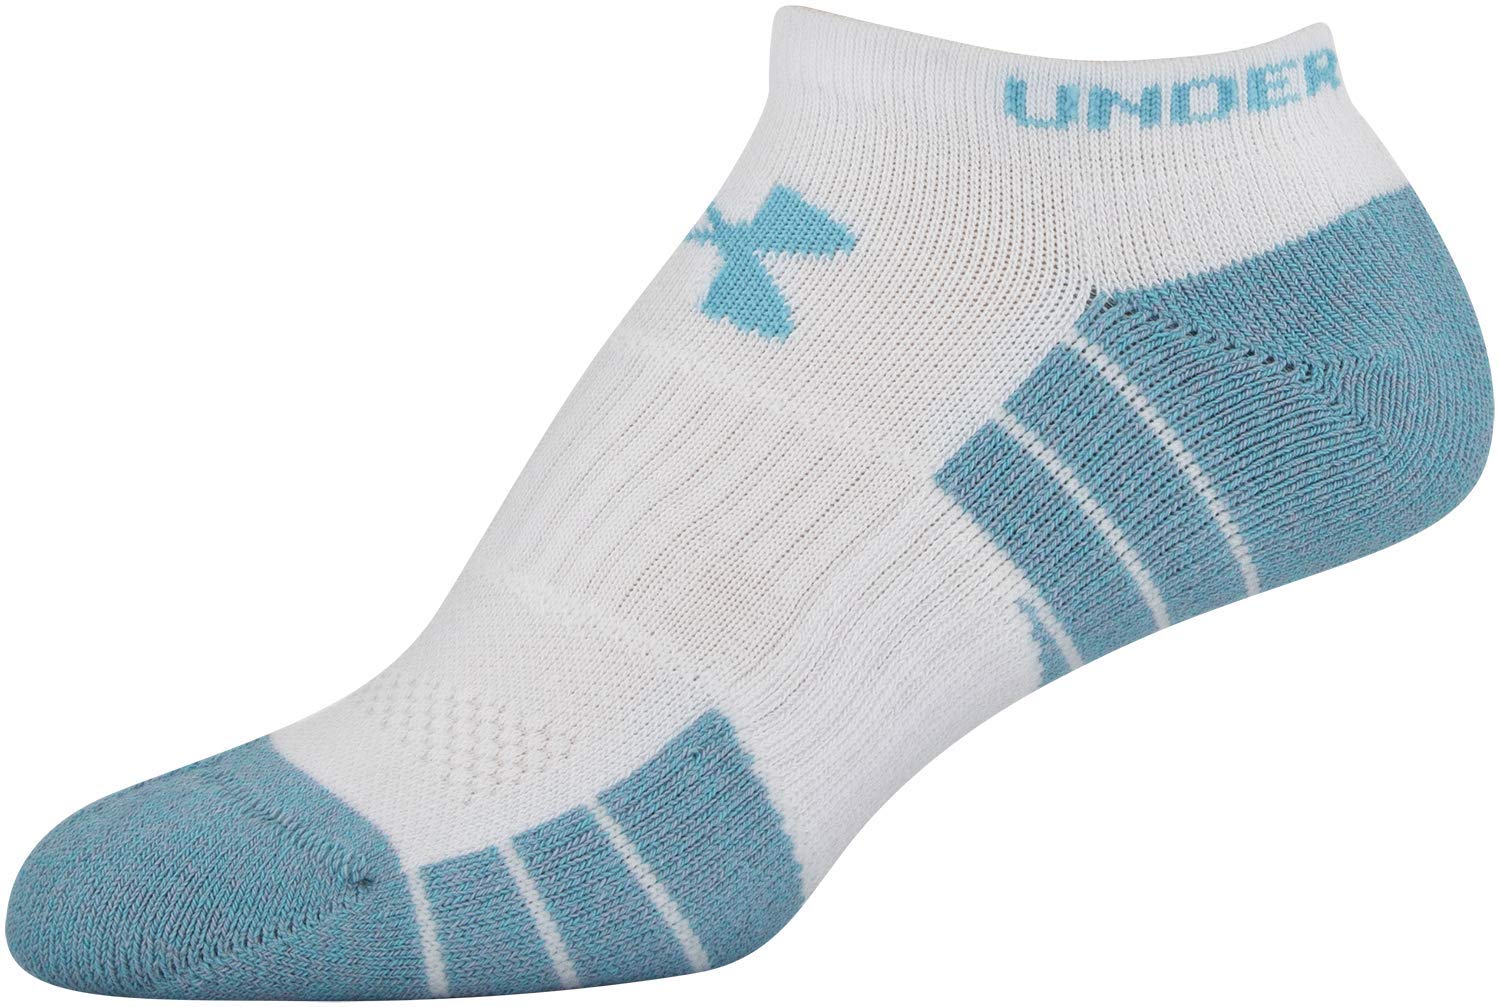 Under Armour Golf Elevated Performance No Show Socks, 2-Pair, Breathtaking Blue Assorted, Shoe Size: Mens 4-8, Womens 6-9